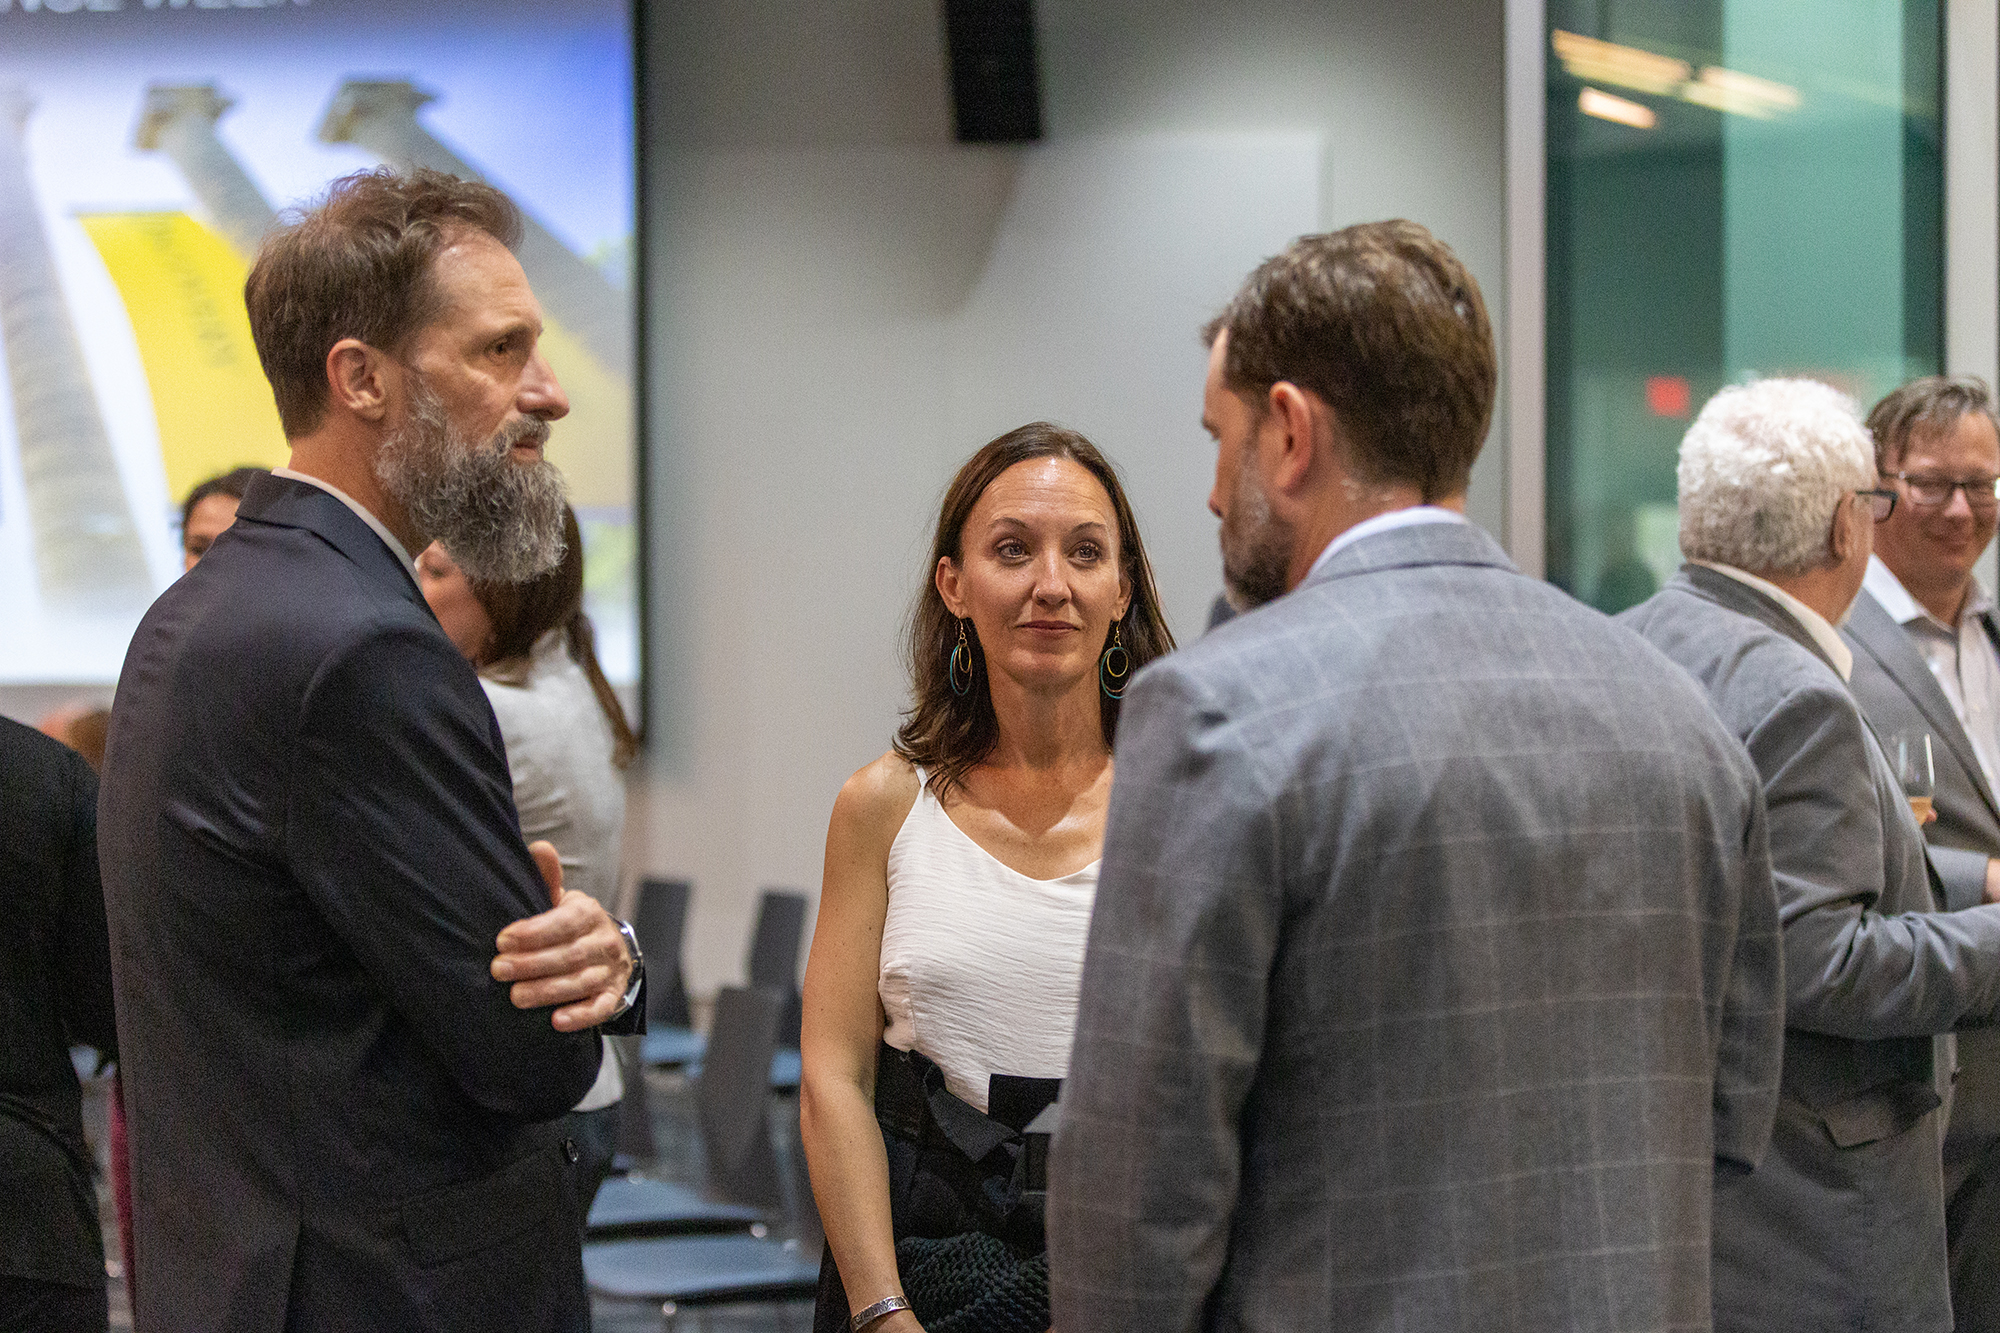 three people chat at an event reception